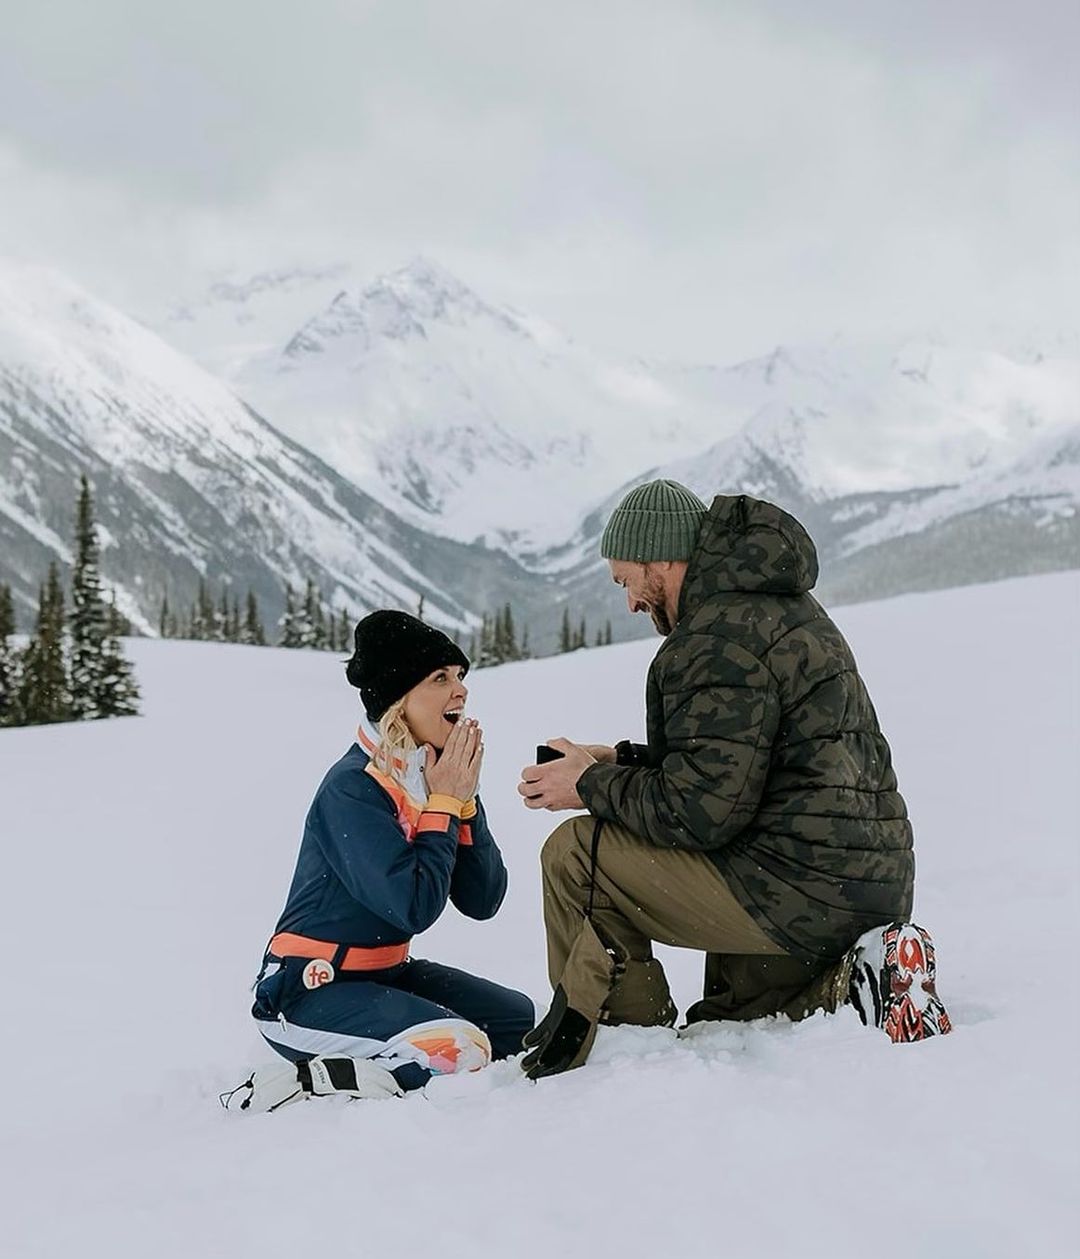 Kortney Wilson and her fiance Ryan proposing in snowy Whistler